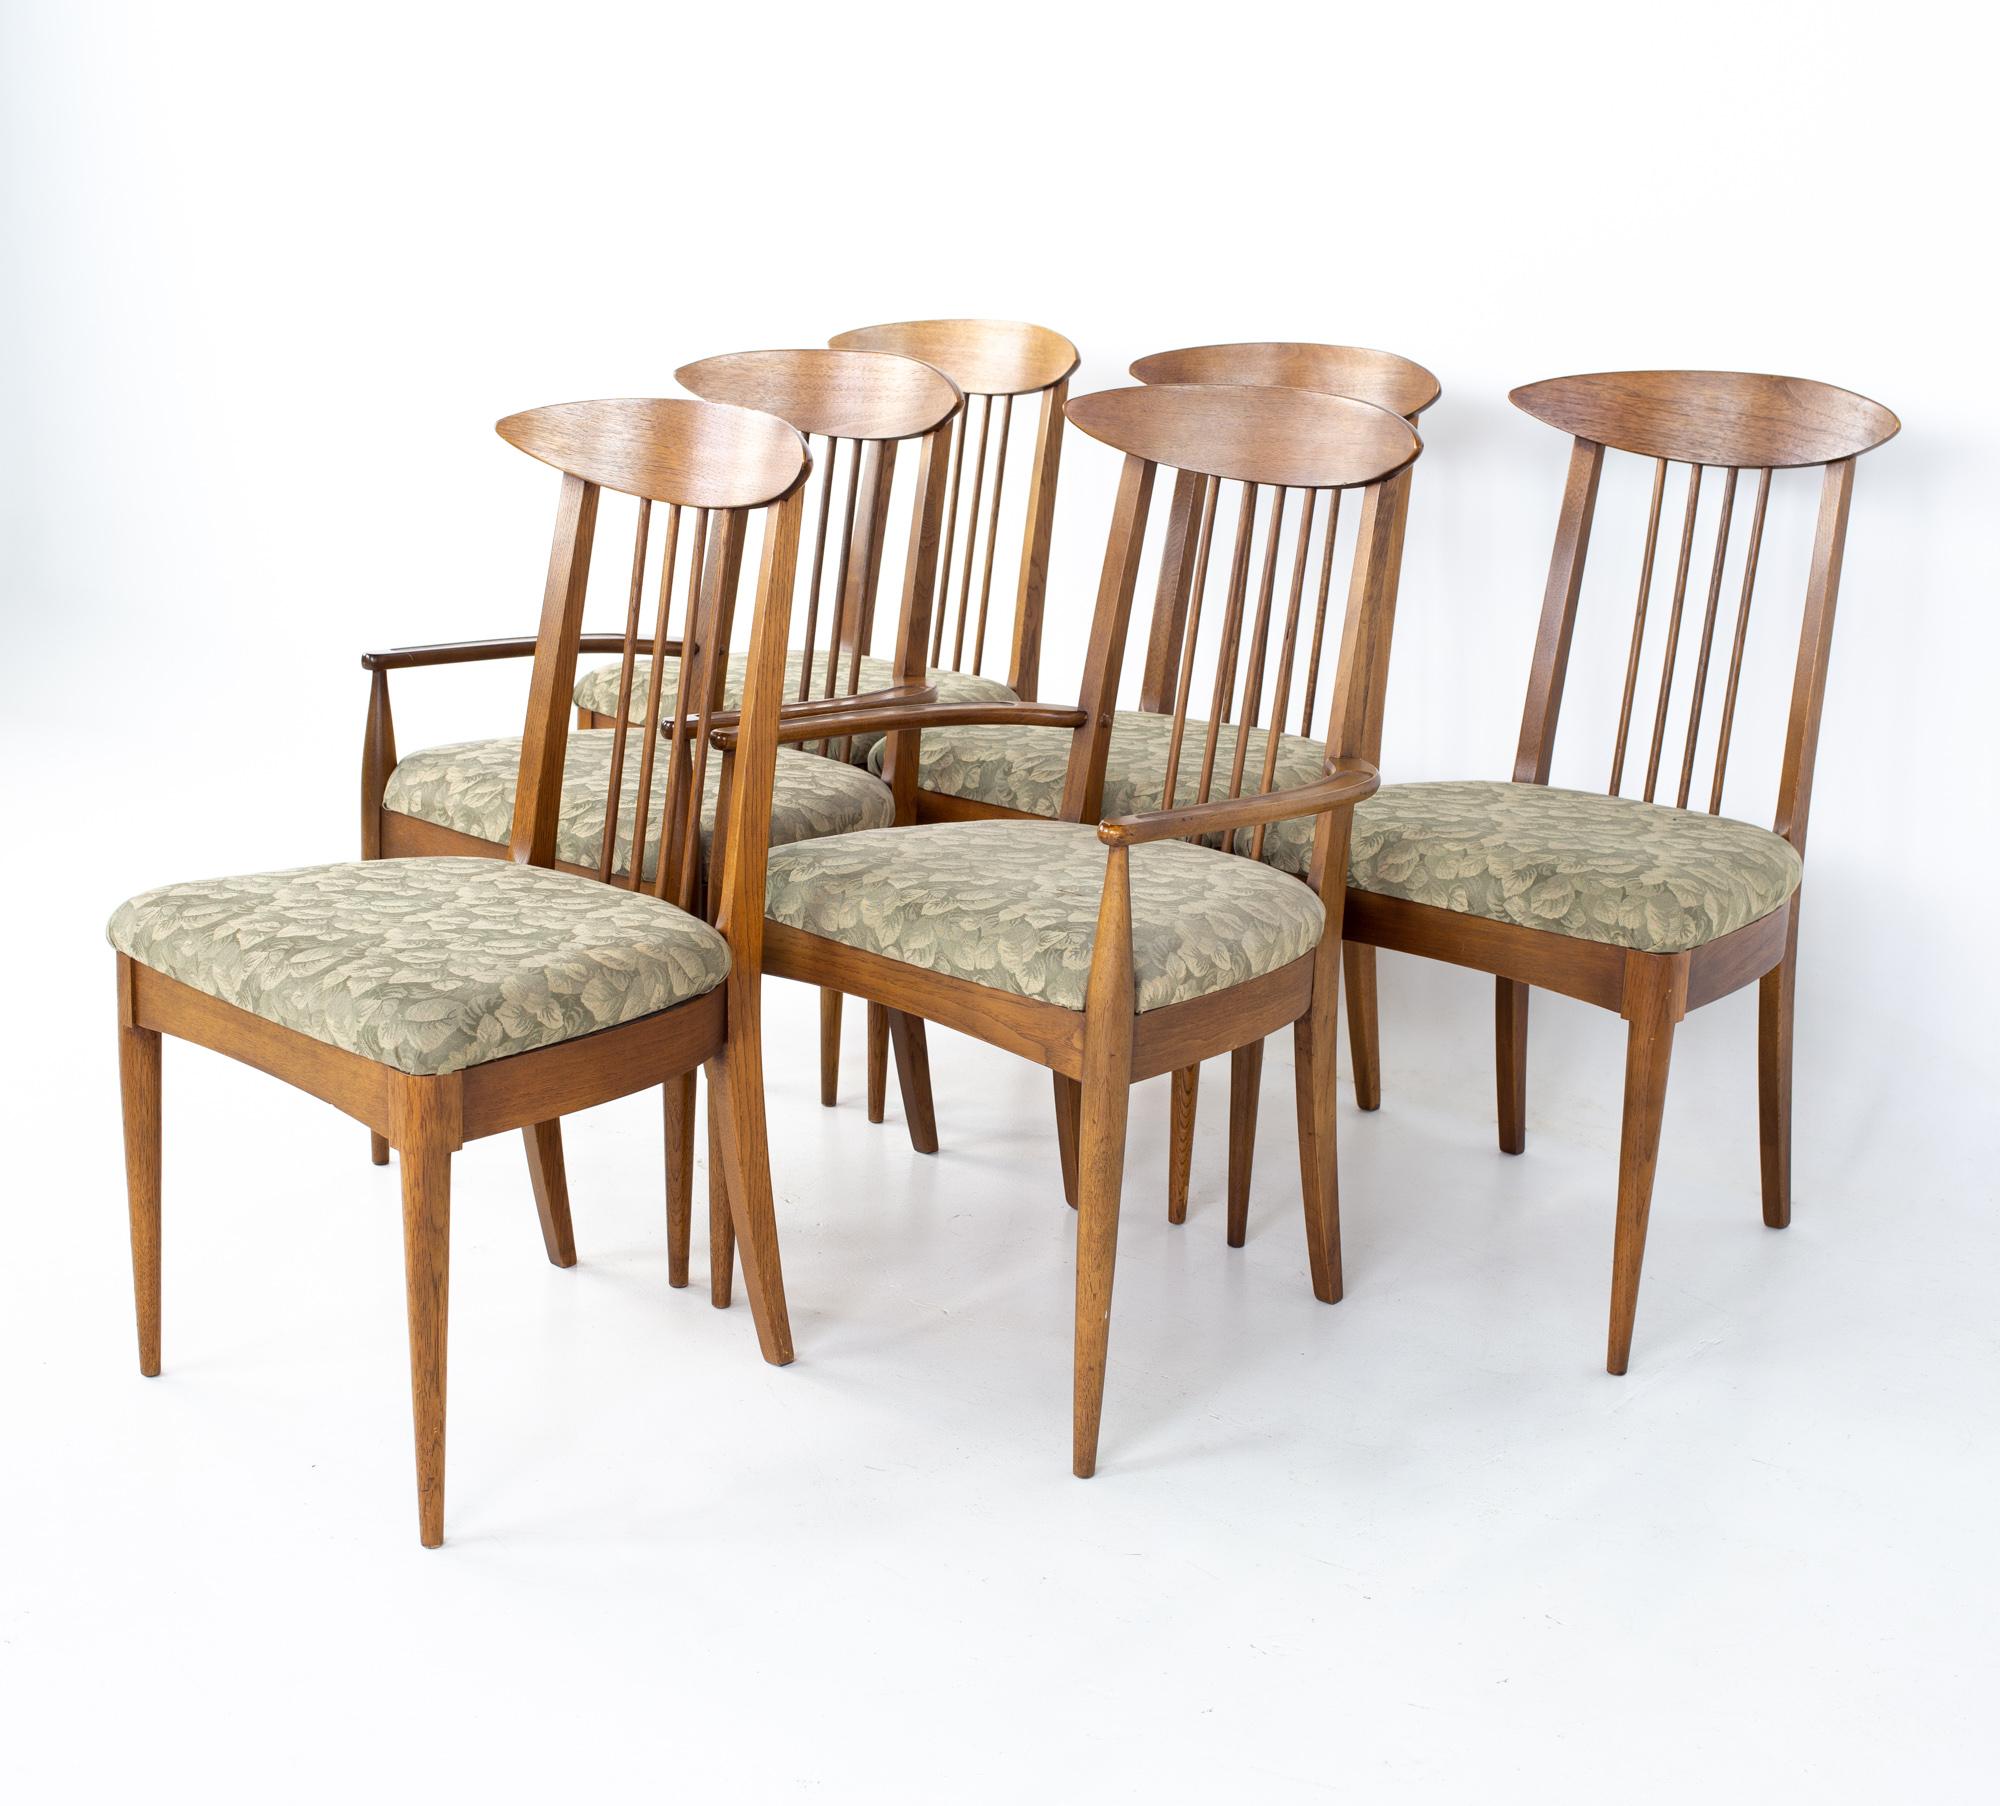 Broyhill sculptra brutalist mid century walnut cat's eye dining chairs - set of 6
Each chair measures: 21 wide x 20 deep x 36 high, with a seat height of 19 inches 

All pieces of furniture can be had in what we call restored vintage condition.